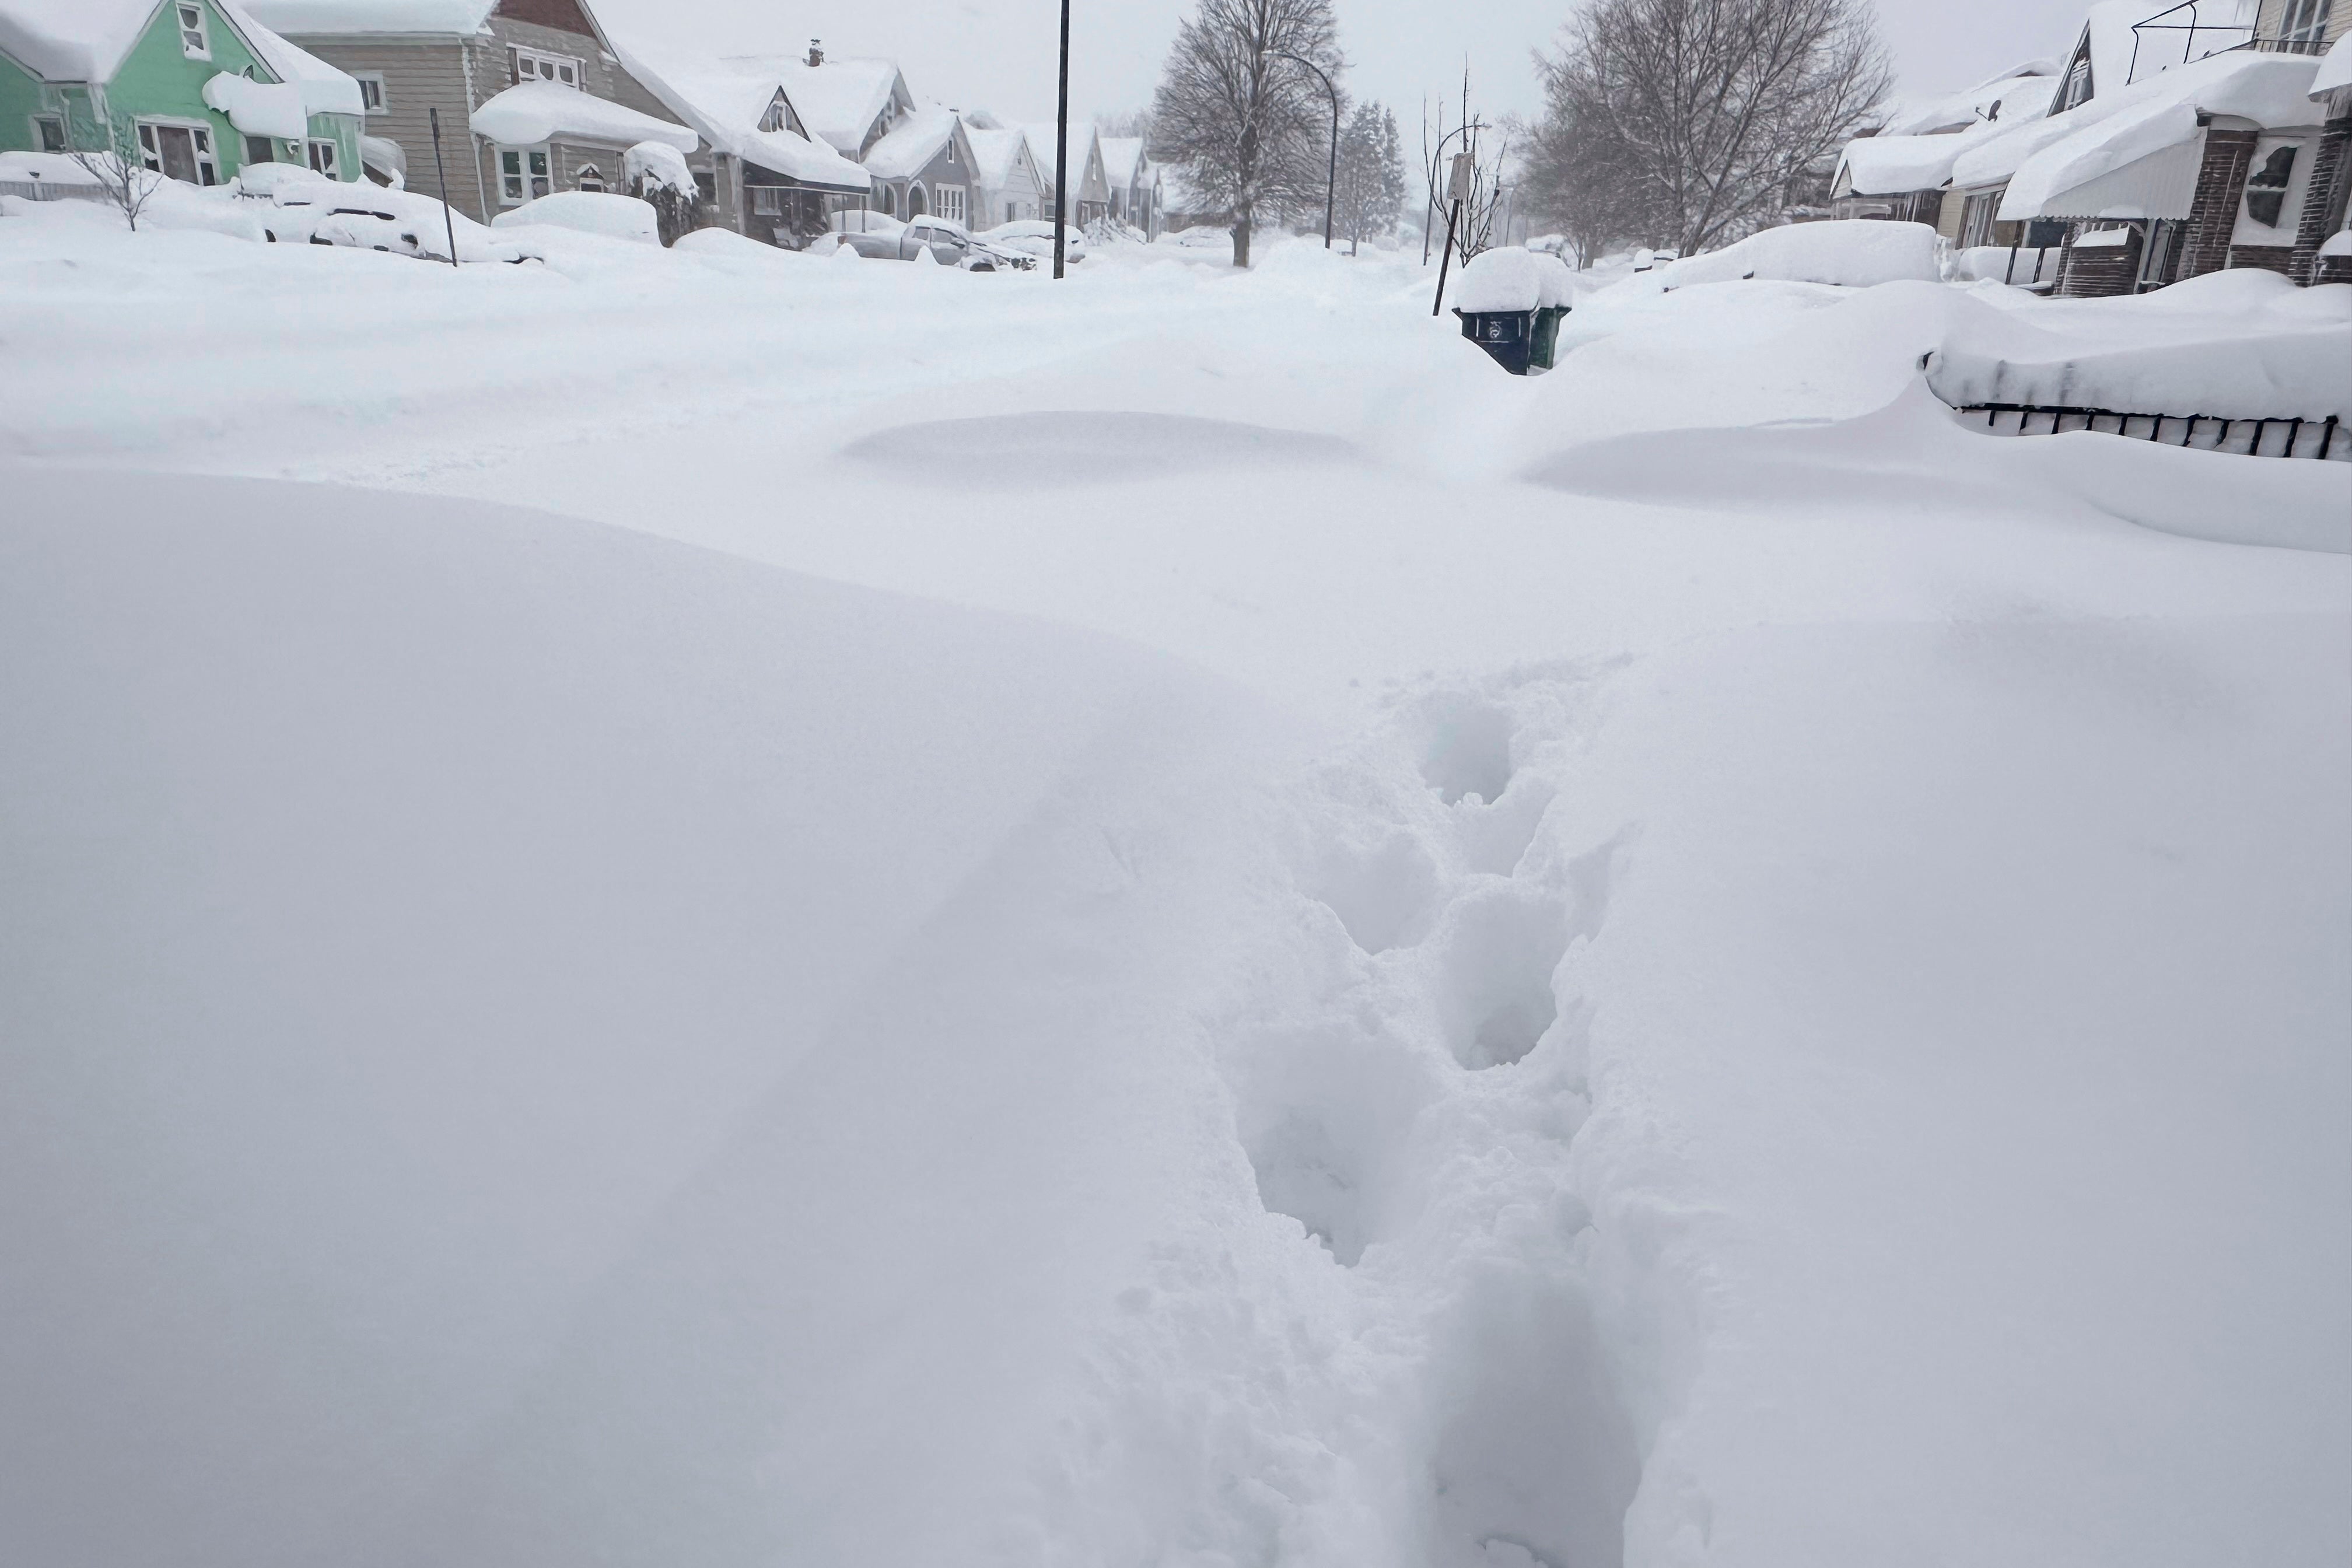 

<p>Footprints appear on a residential street after at least 18 inches of new snow fell overnight on Tuesday in Buffalo</p>
<p>” height=”2688″ width=”4032″ layout=”responsive” i-amphtml-layout=”responsive”><i-amphtml-sizer slot=